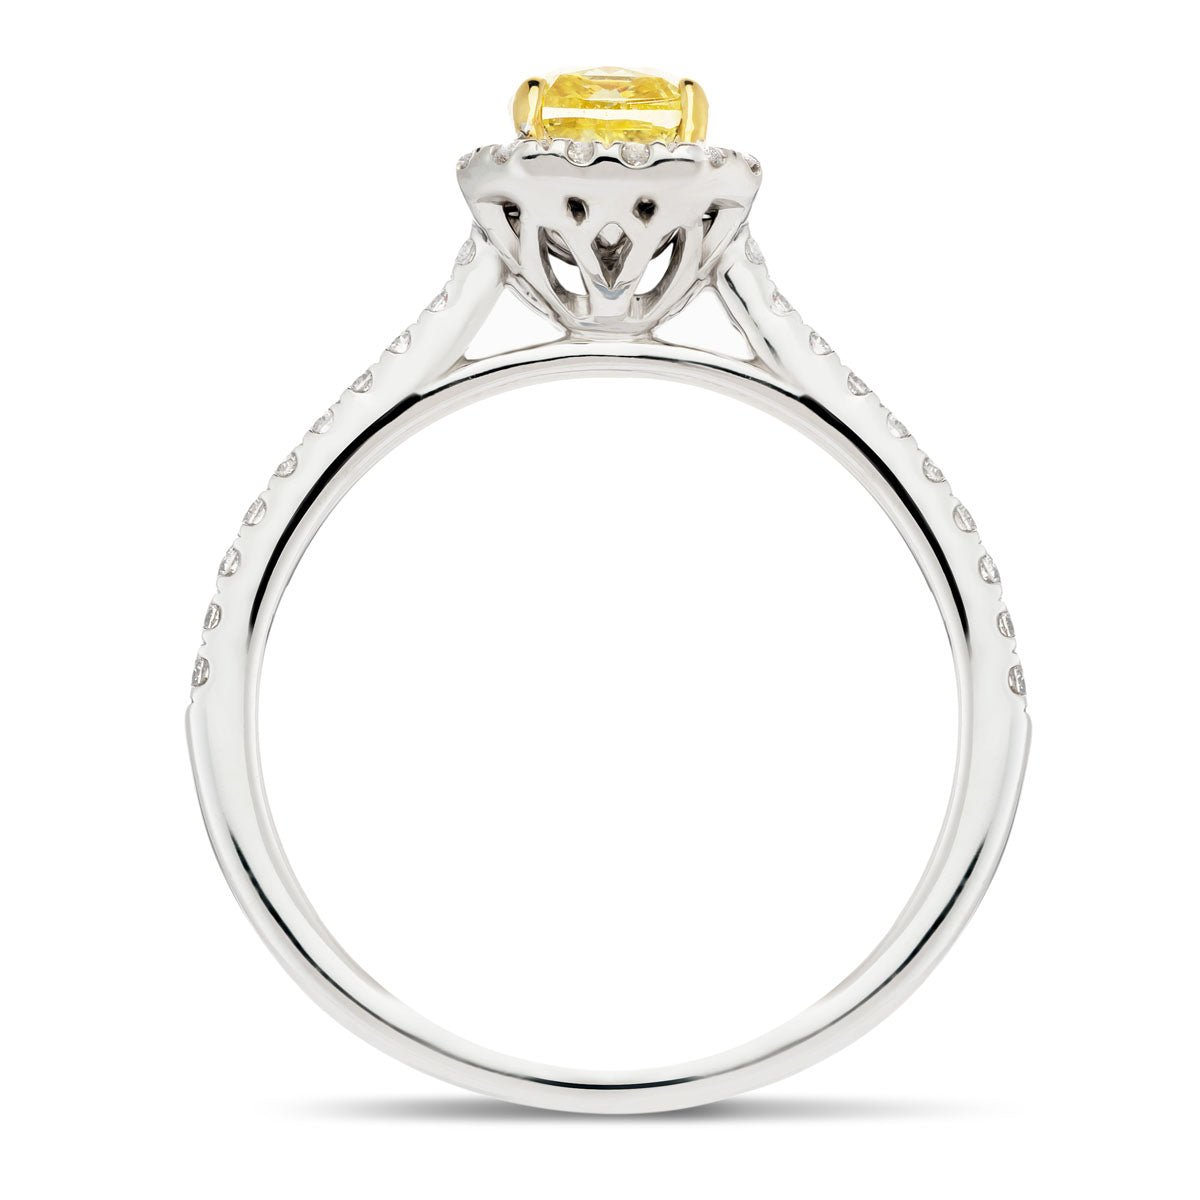 Certified Cushion Yellow Diamond Engagement Ring 1.30ct Ring in 18k White Gold - All Diamond